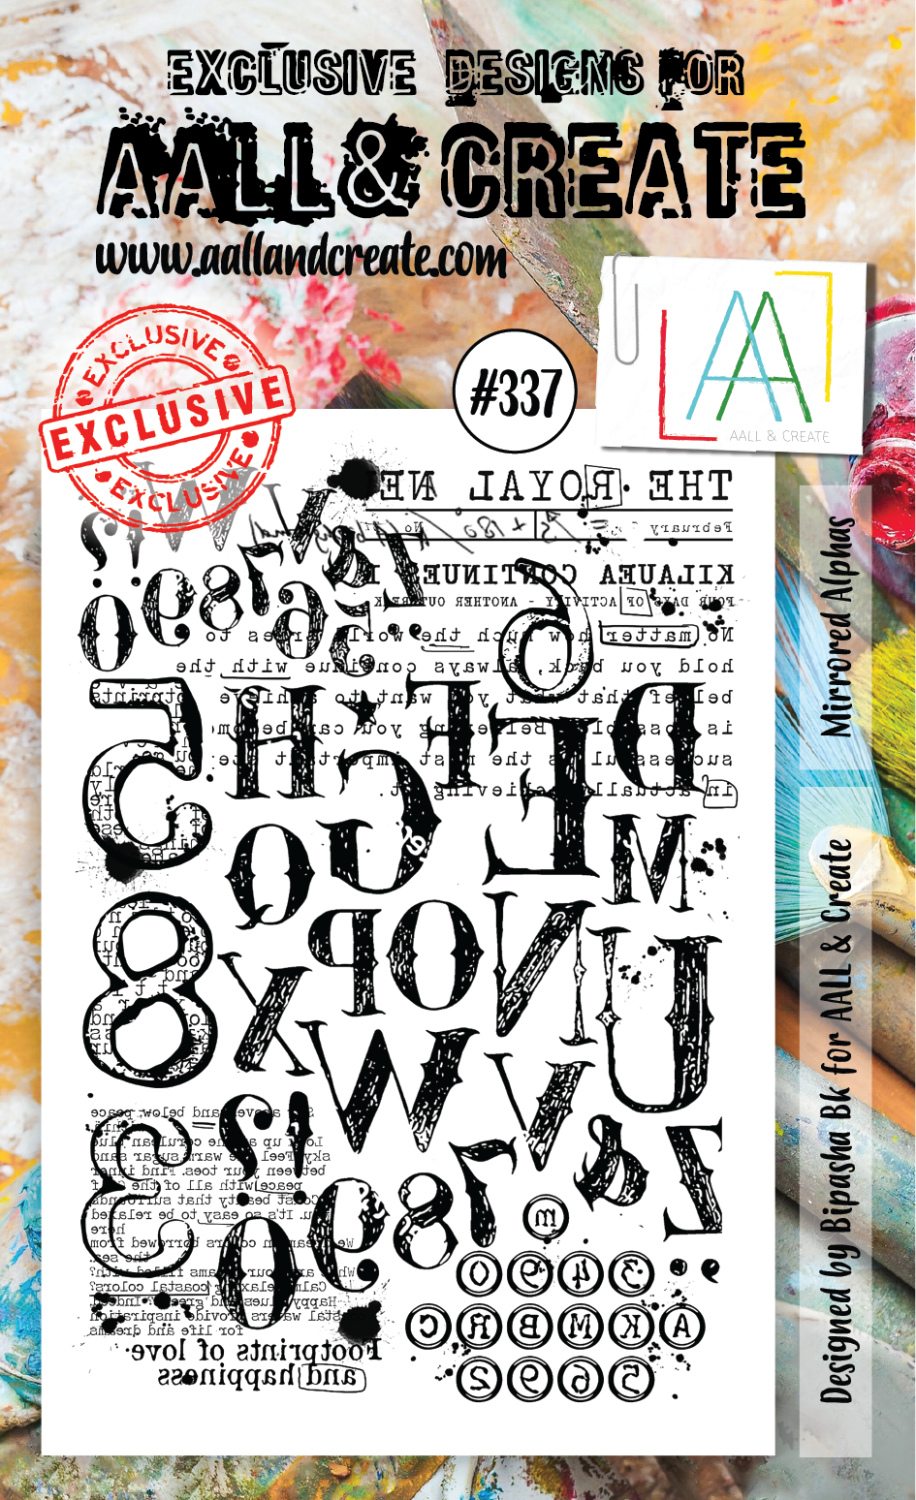 Mirrored Alphas #337 - A6 STAMPS - AAll&Create